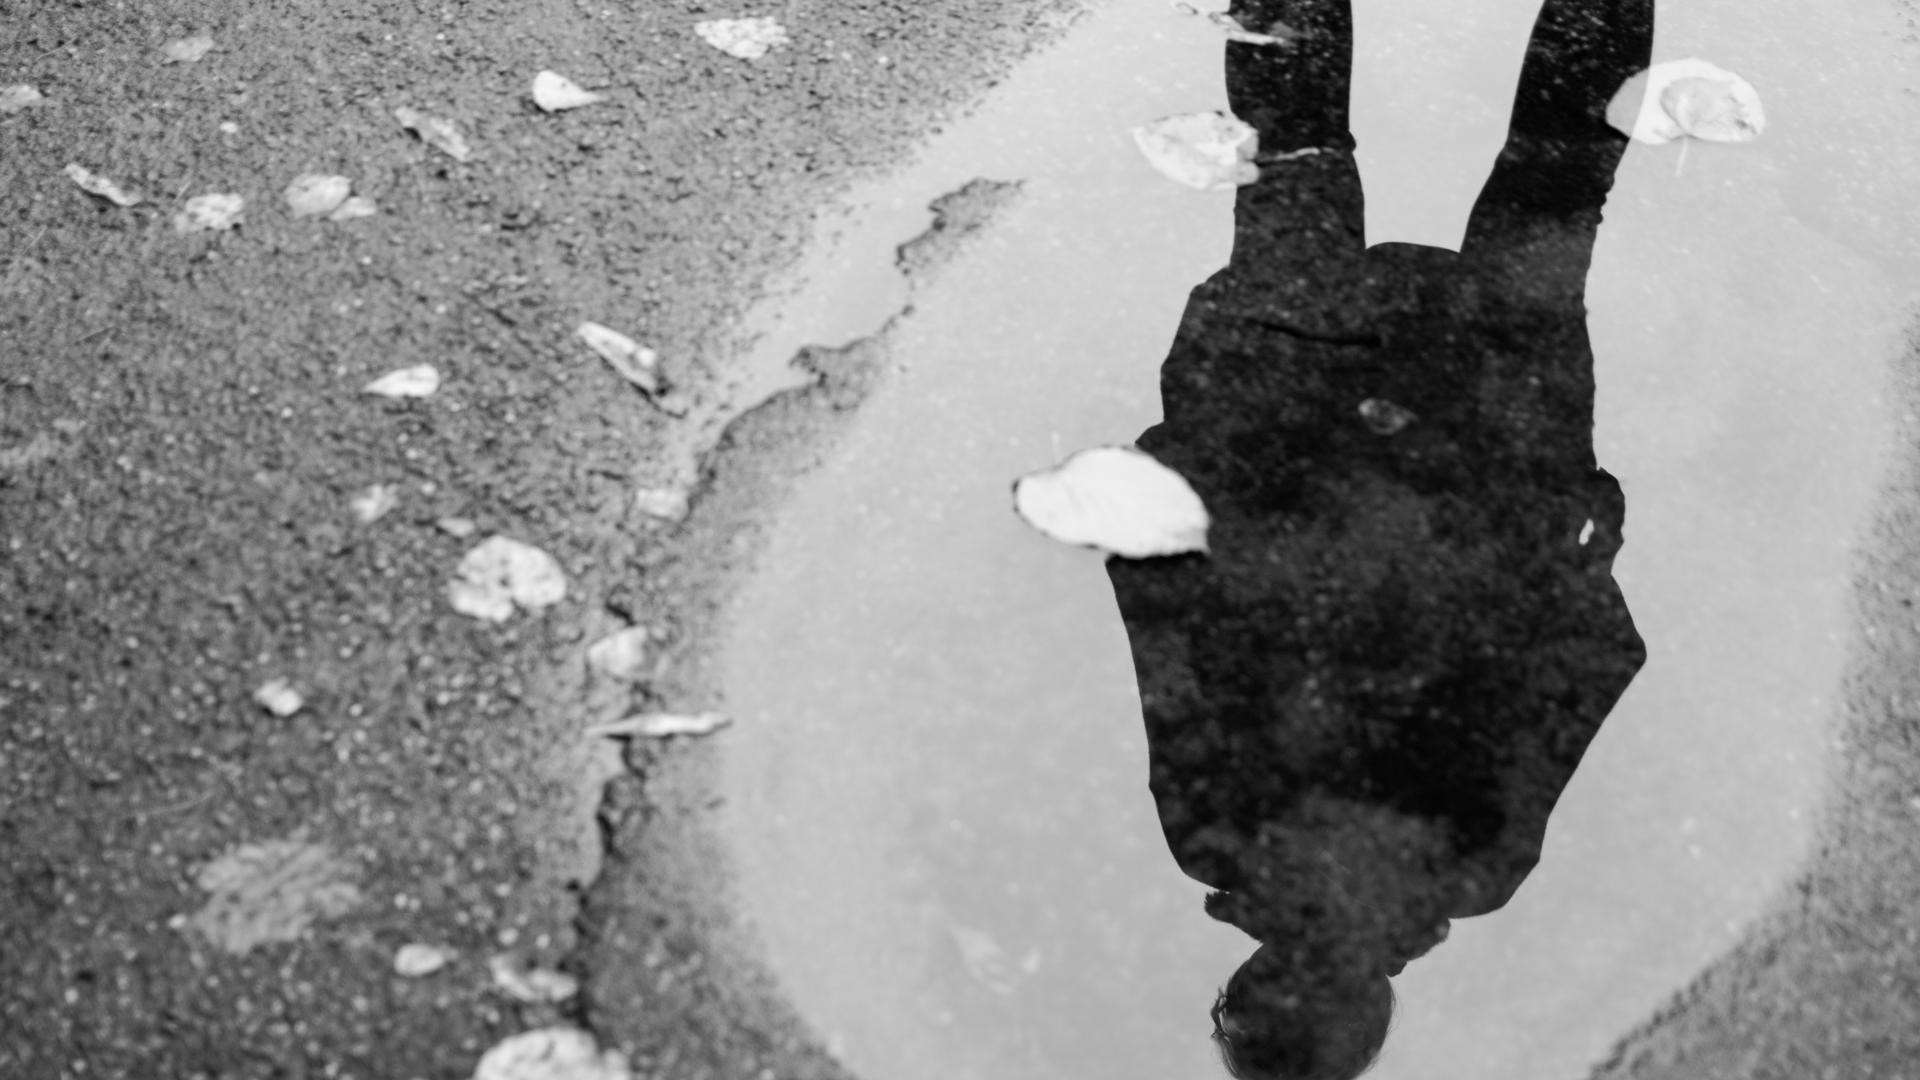 A man reflected in a puddle